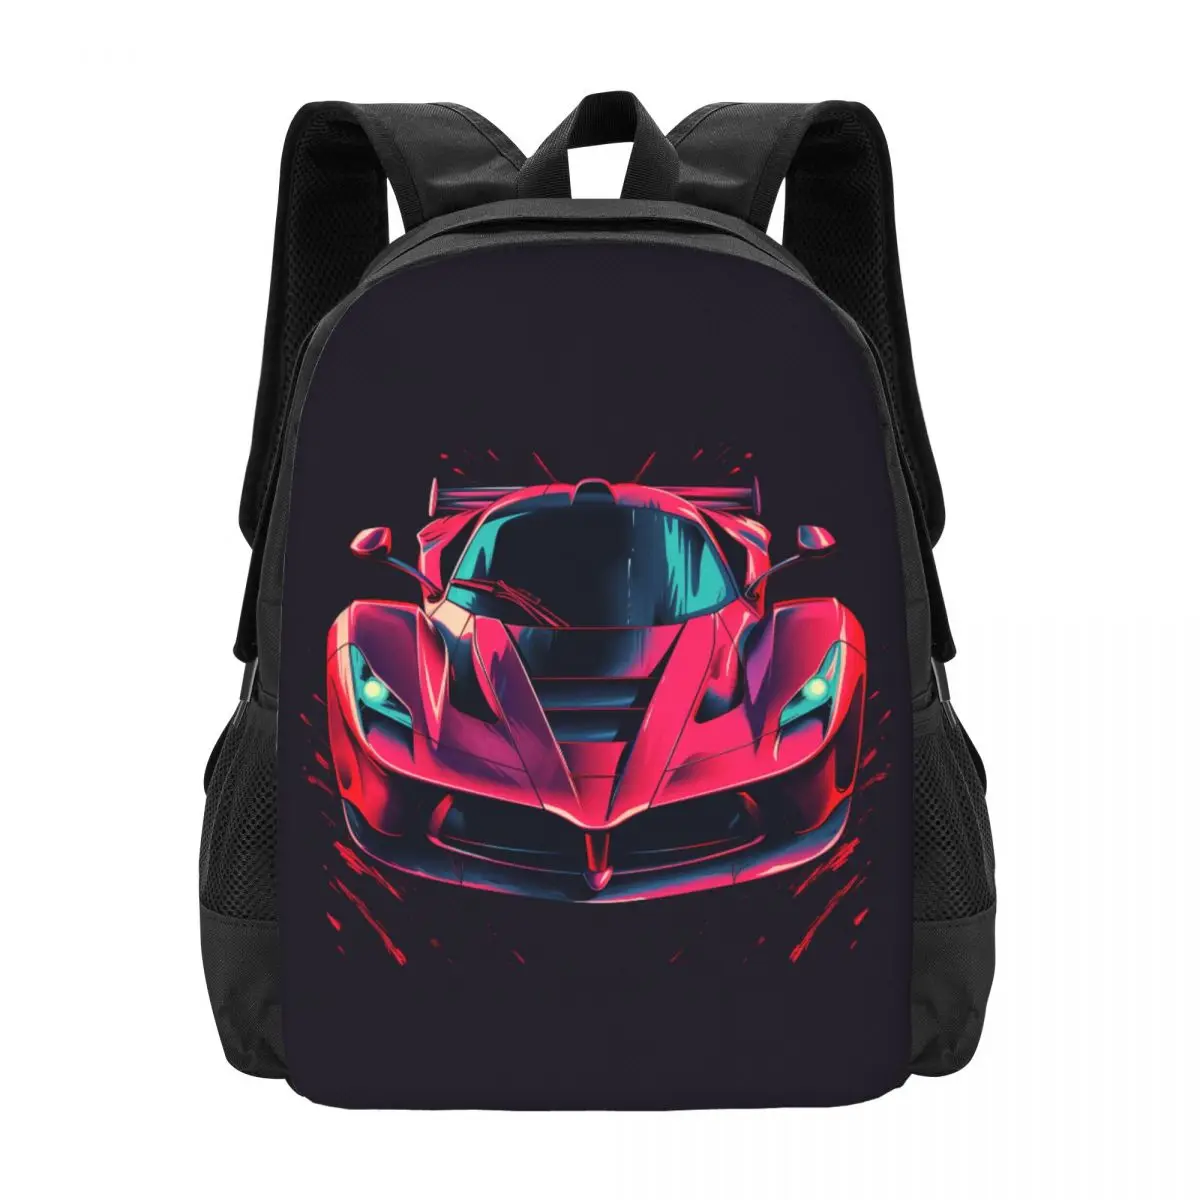 

Passionate Sports Car Backpack Vibrant Tones Vintage College Backpacks Women Fashion School Bags High Quality Big Rucksack